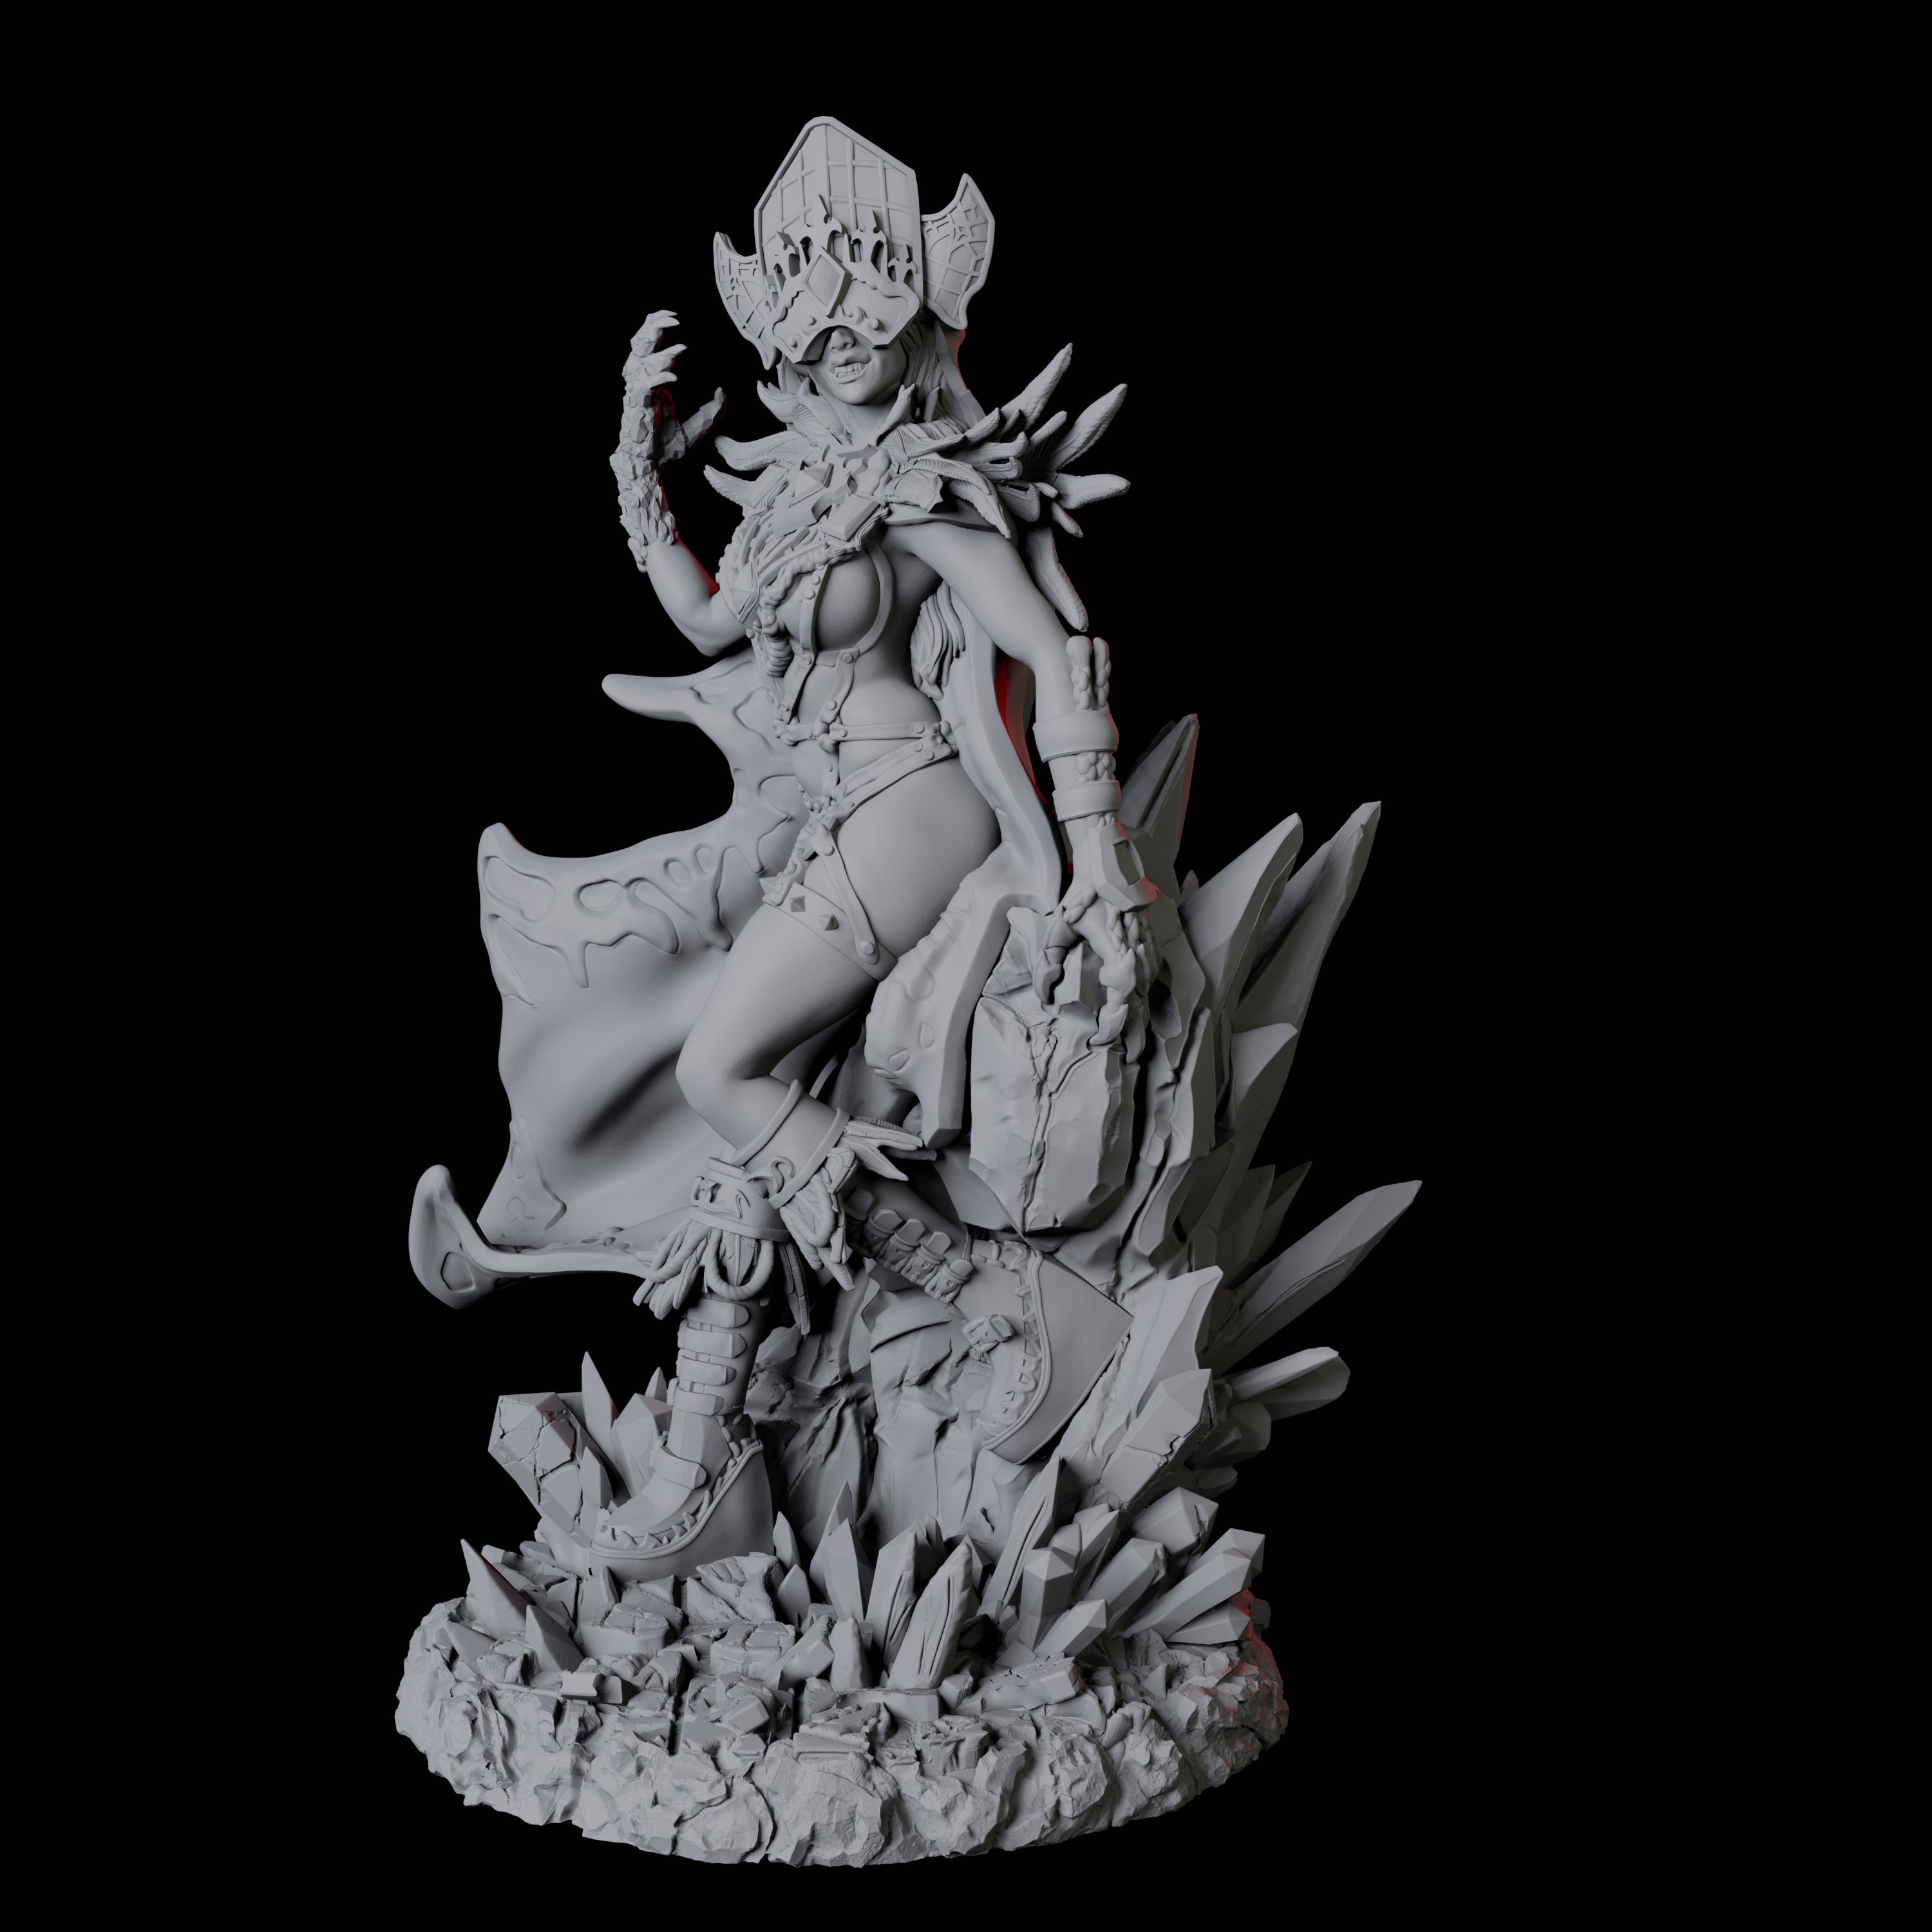 Ice Sorceress Miniature for Dungeons and Dragons, Pathfinder or other TTRPGs